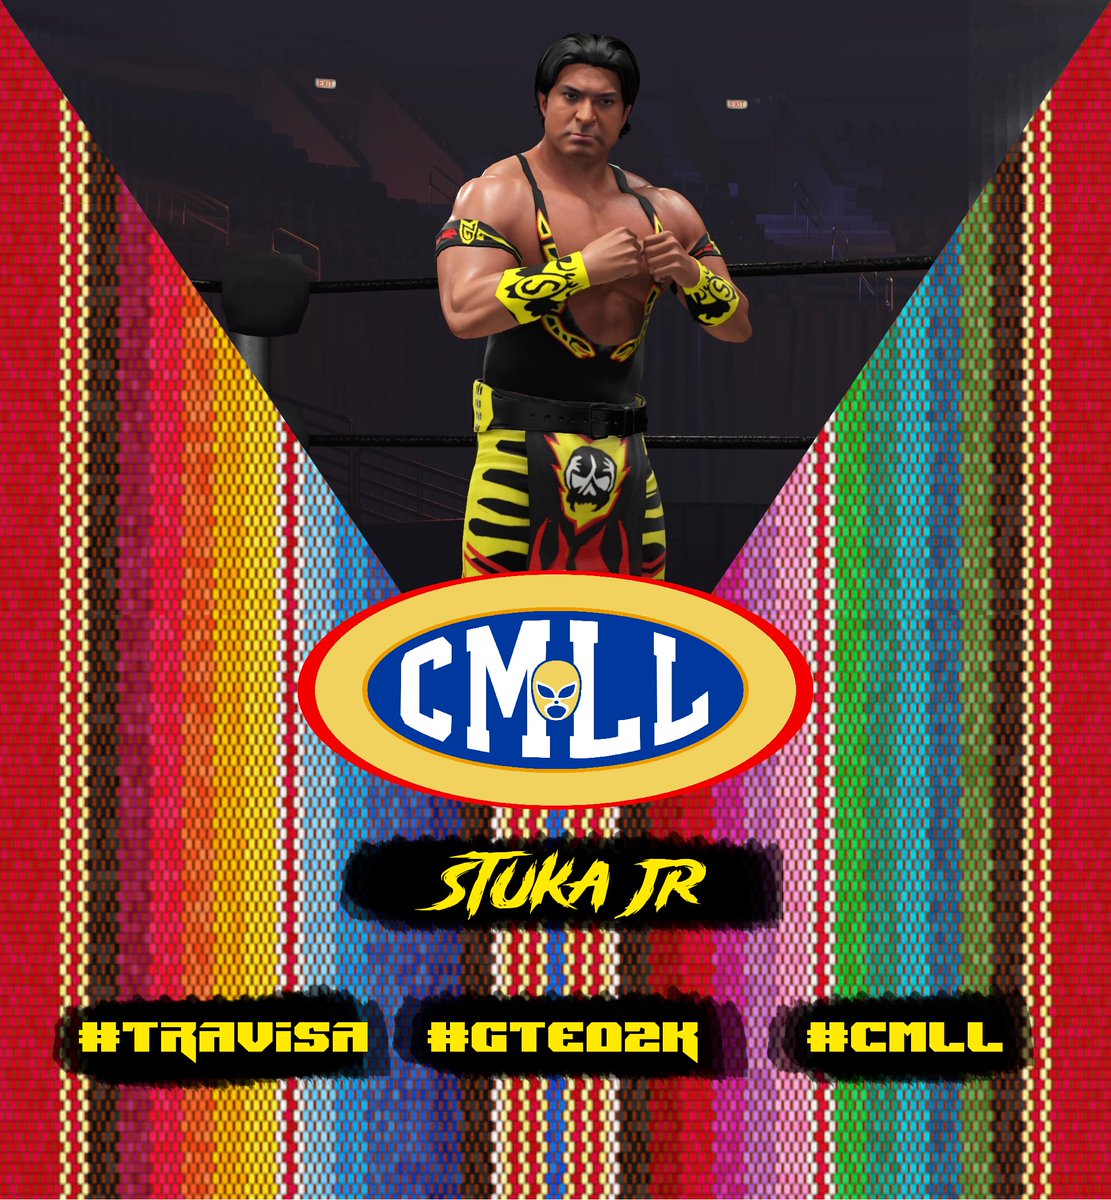 My version of Stuka Jr. is out now for #wwe2k24 as part of the Get the E Out Project's 2nd CMLL pack @GTEO2K Moveset is by @iBudsMoves. 7 logos total #gteo2k #cmll